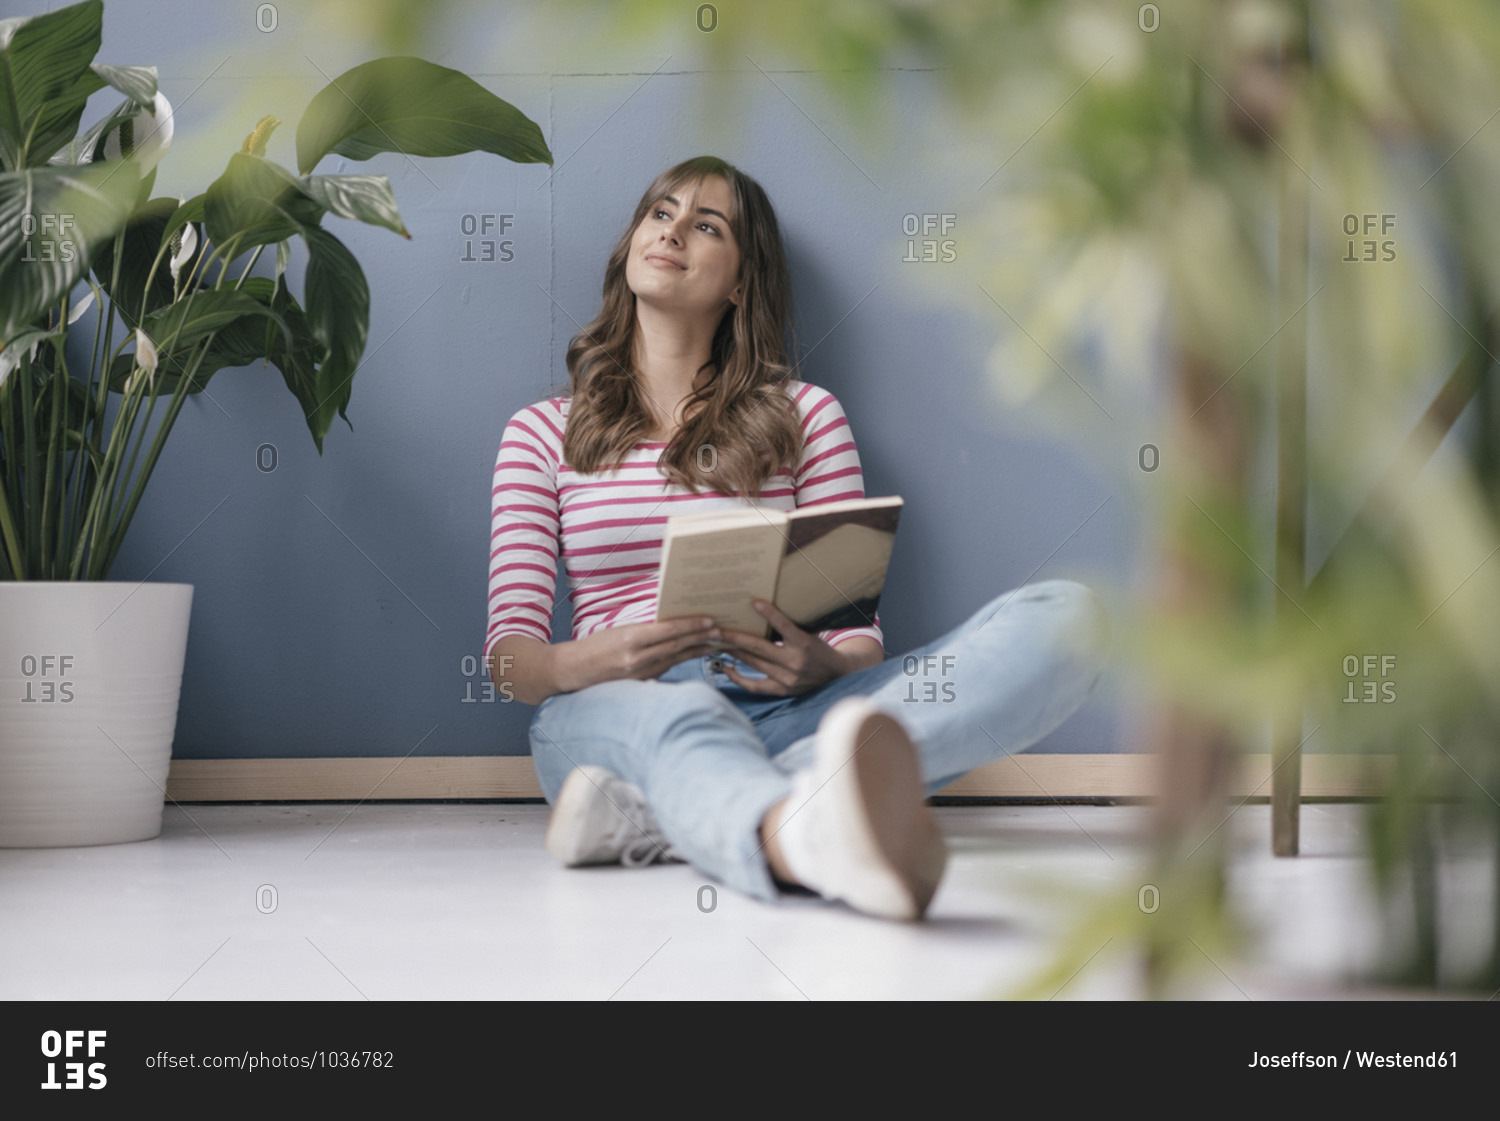 Woman sitting on ground in her new home- reading a book- surrounded by plants